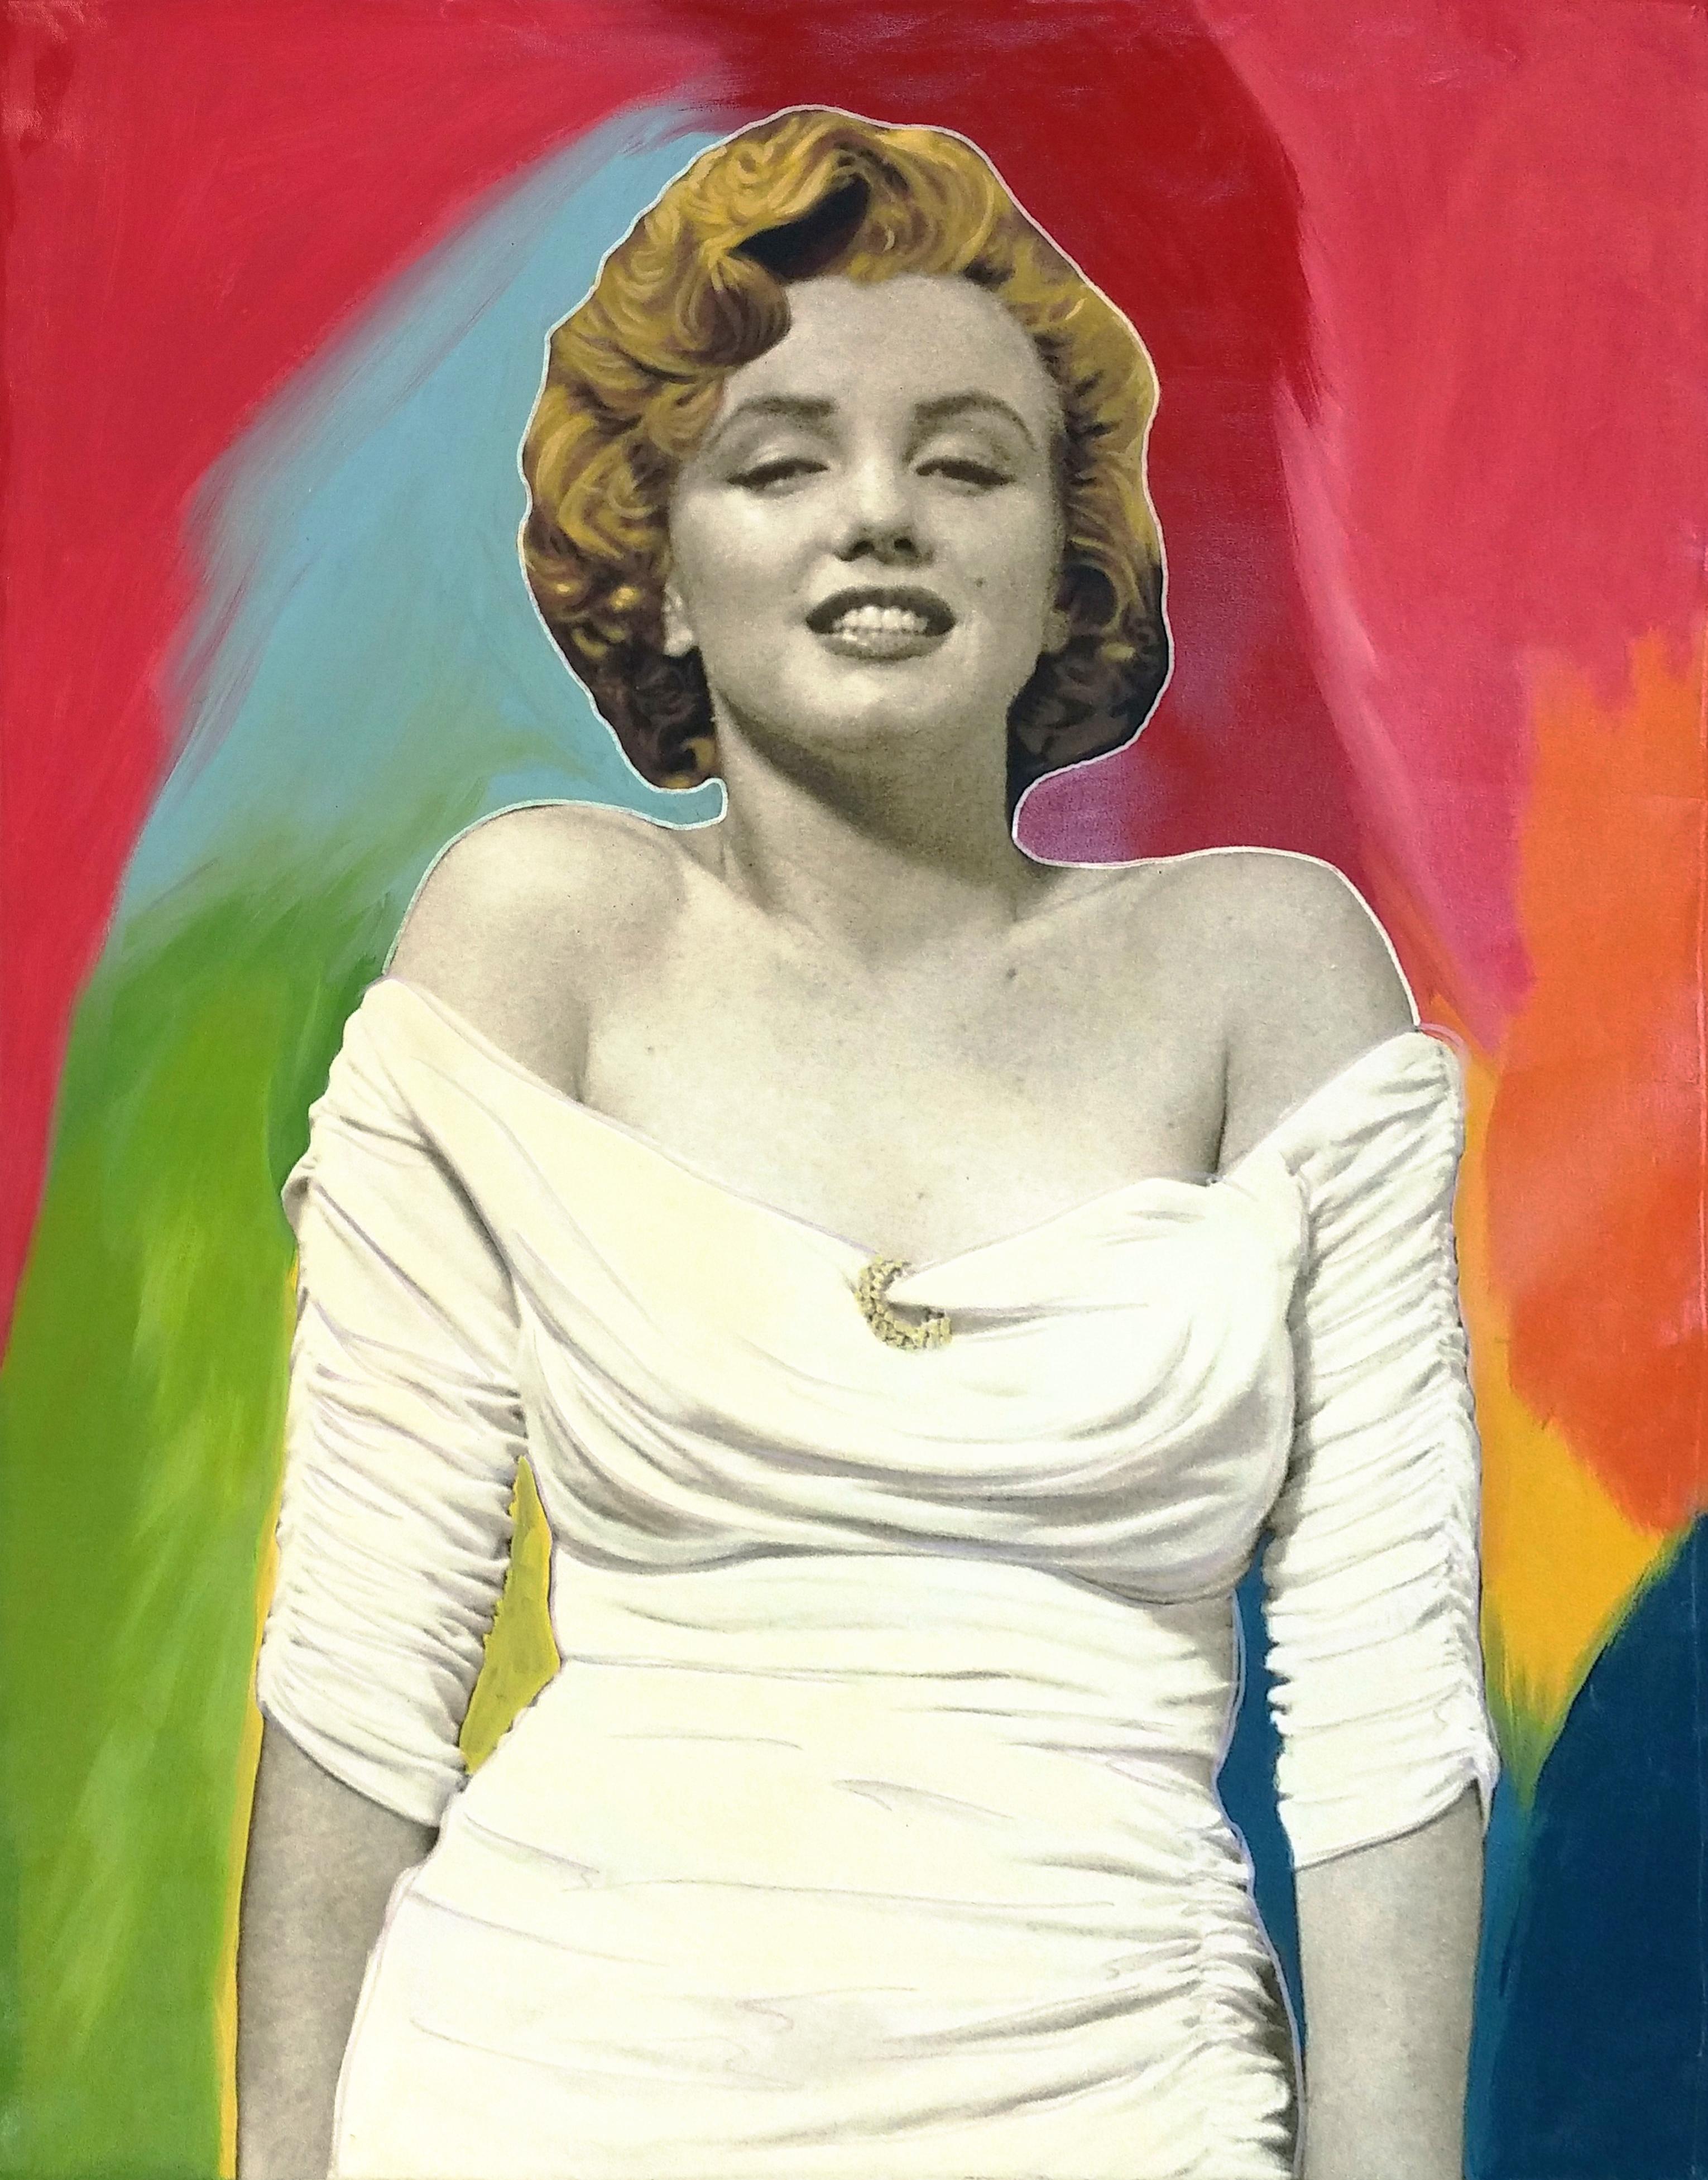 MARILYN - THE YOUNG MOVIE IDOL